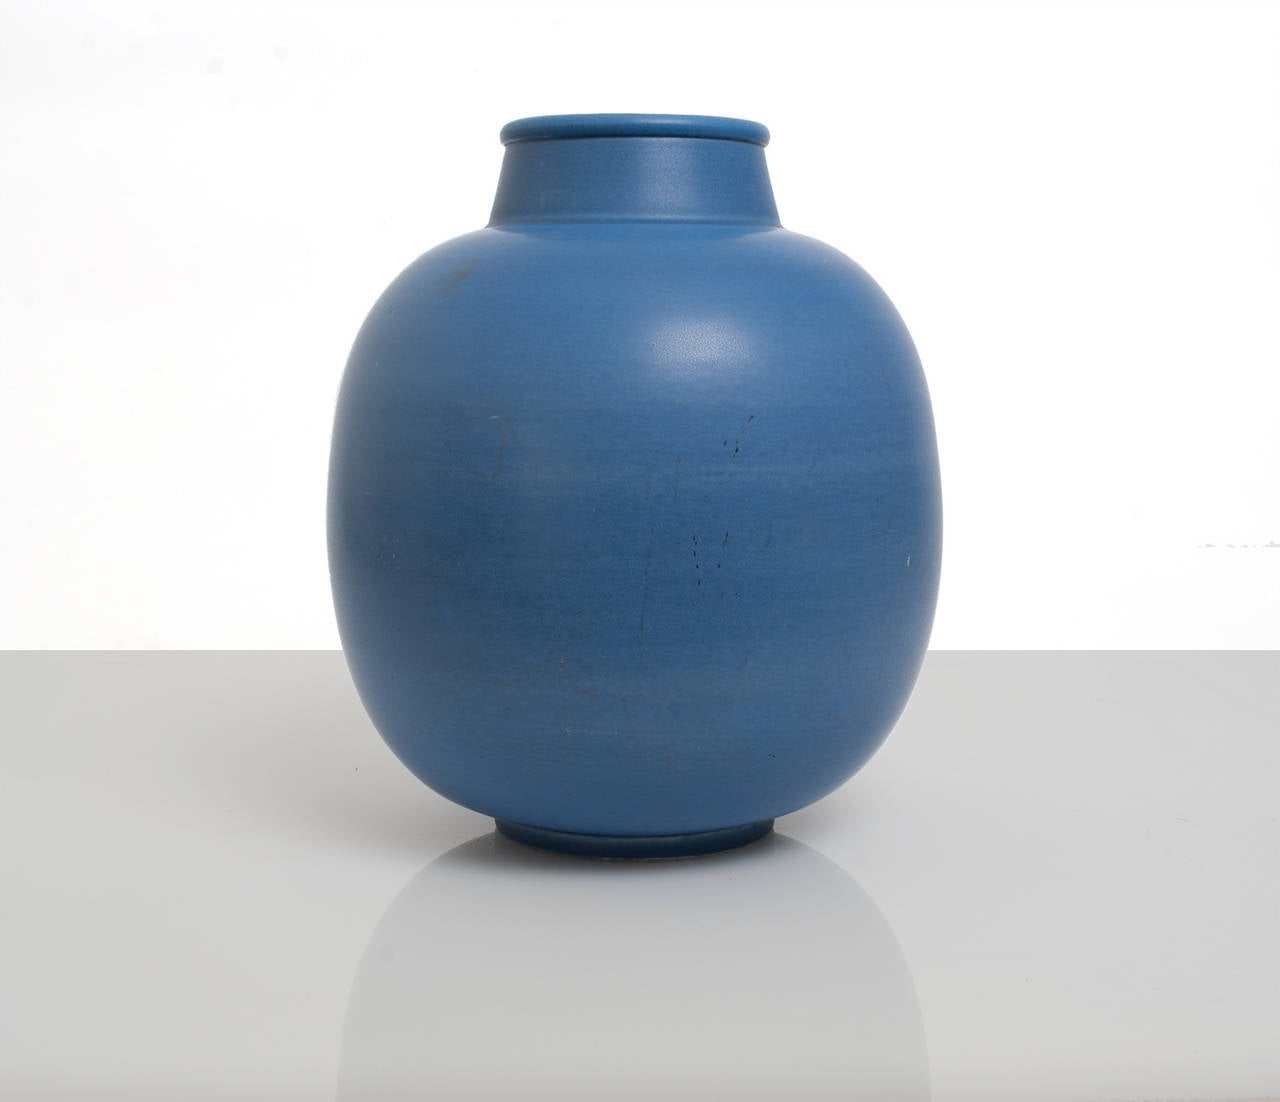 Swedish Art Deco unique ceramic blue vase by Gertrud Lonegren. Lonegren studied in Vienna and Stockholm during the 1920s, she worked at Upsala-Ekeby in the 1930s before creating these studio pieces at Rorstrand between 1937-1942.

Measures: Height